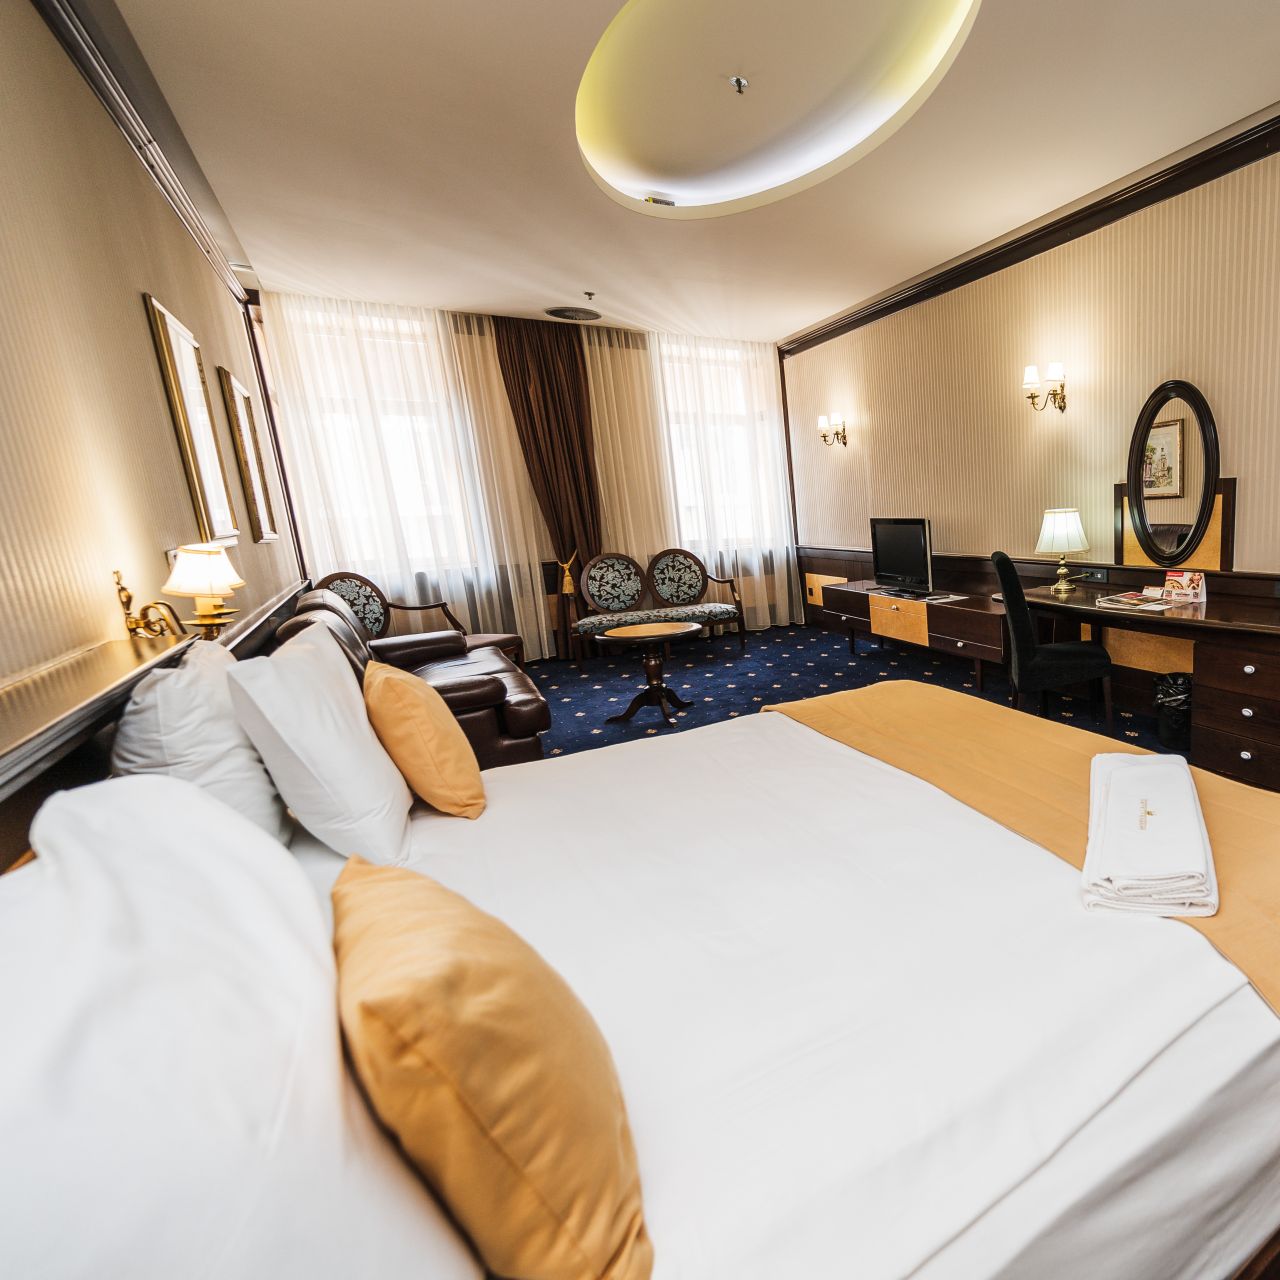 Hotel Europe in Sarajevo,Bosnia and Herzegovina.More information about this  hotel in Sarajevo you can find on our website